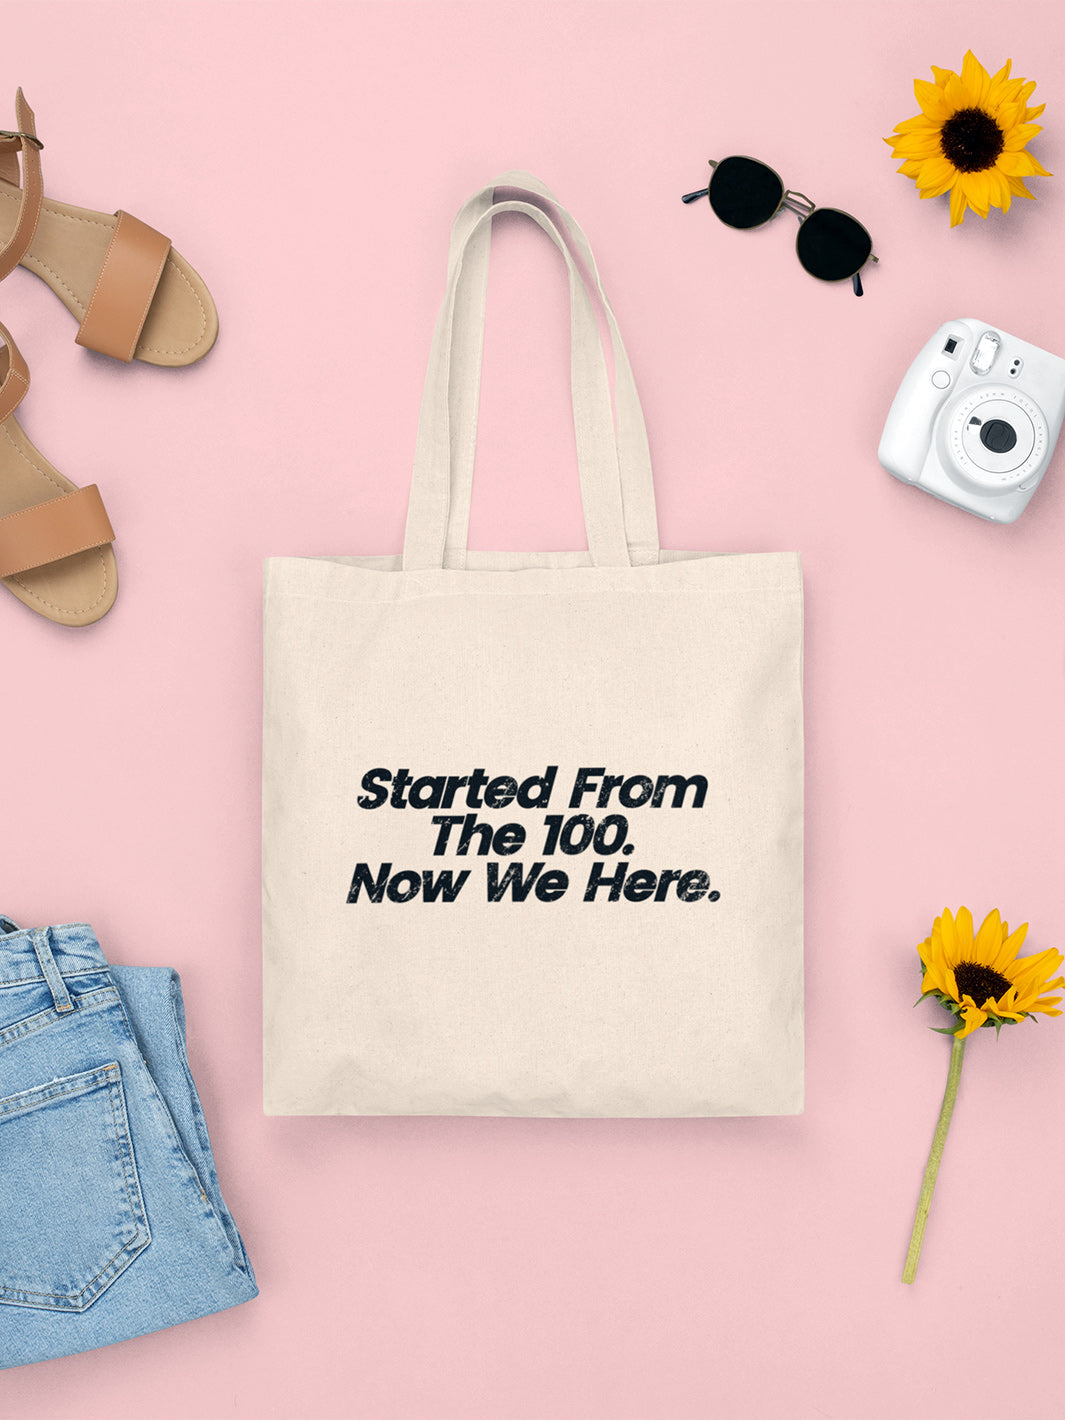 Canvas Tote Bag with handles that says "started from the 100. Now we here".